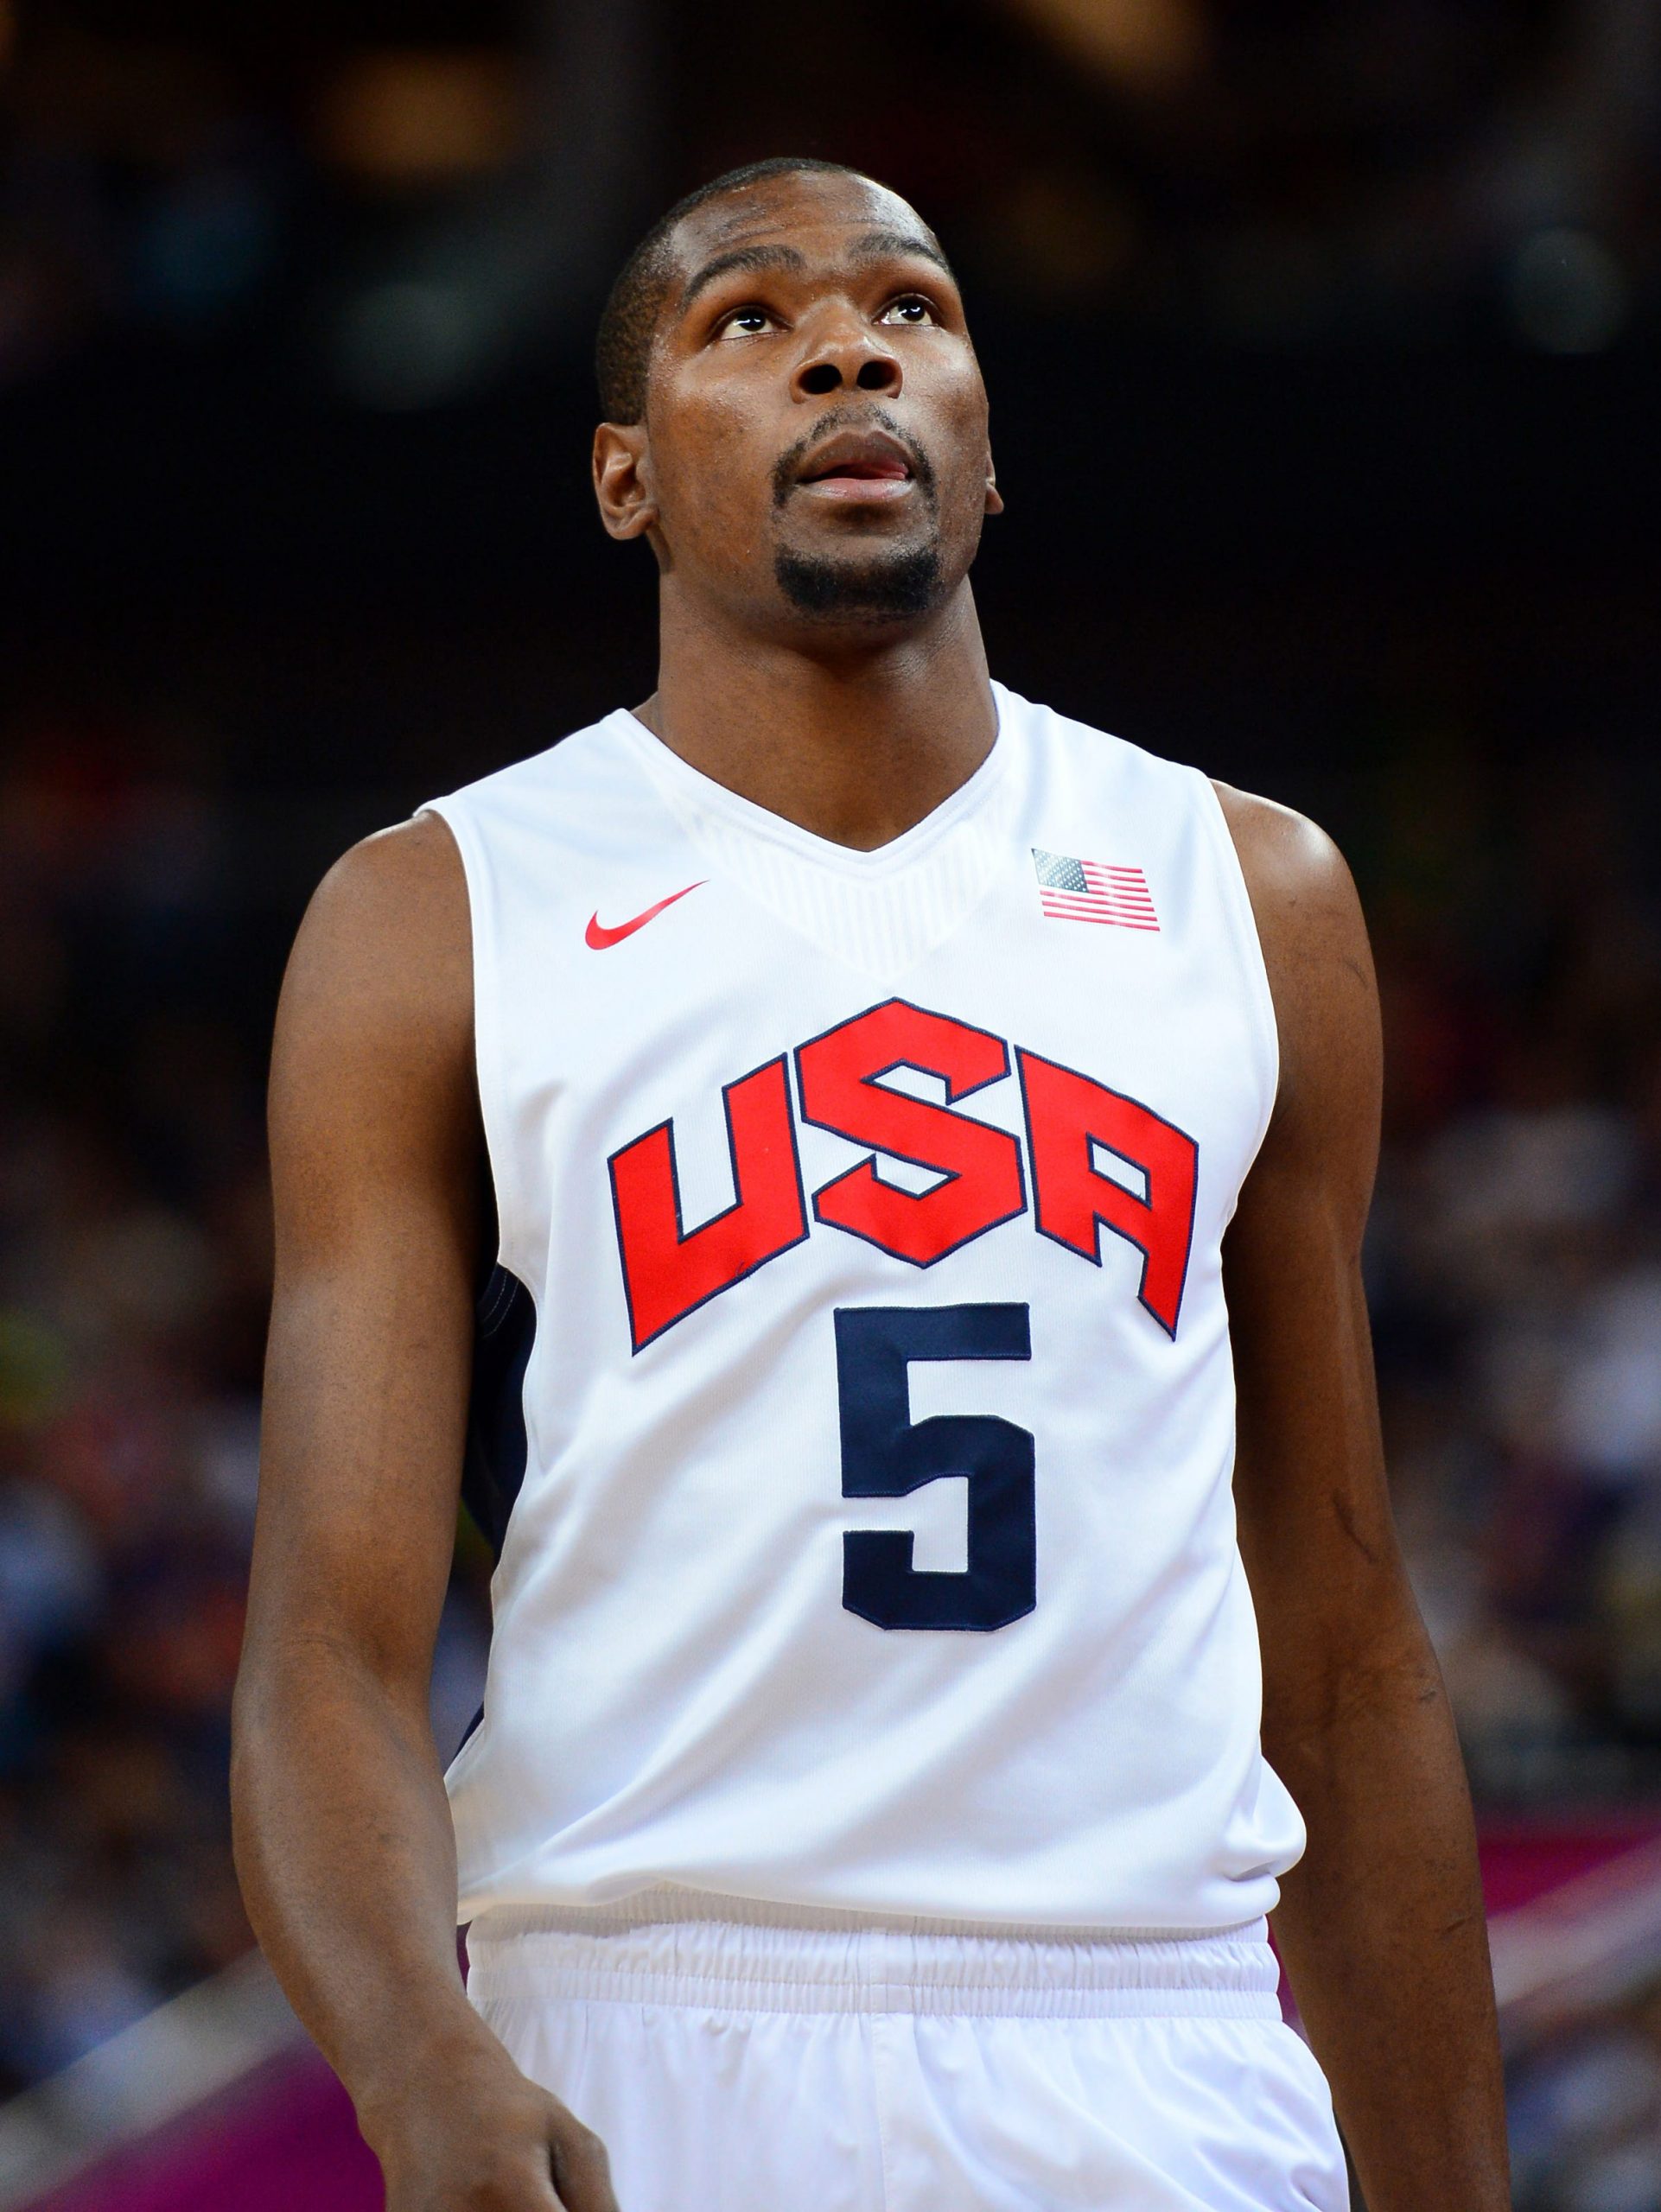 Kevin Durant Named 2021 USA Basketball Male Athlete of the Year